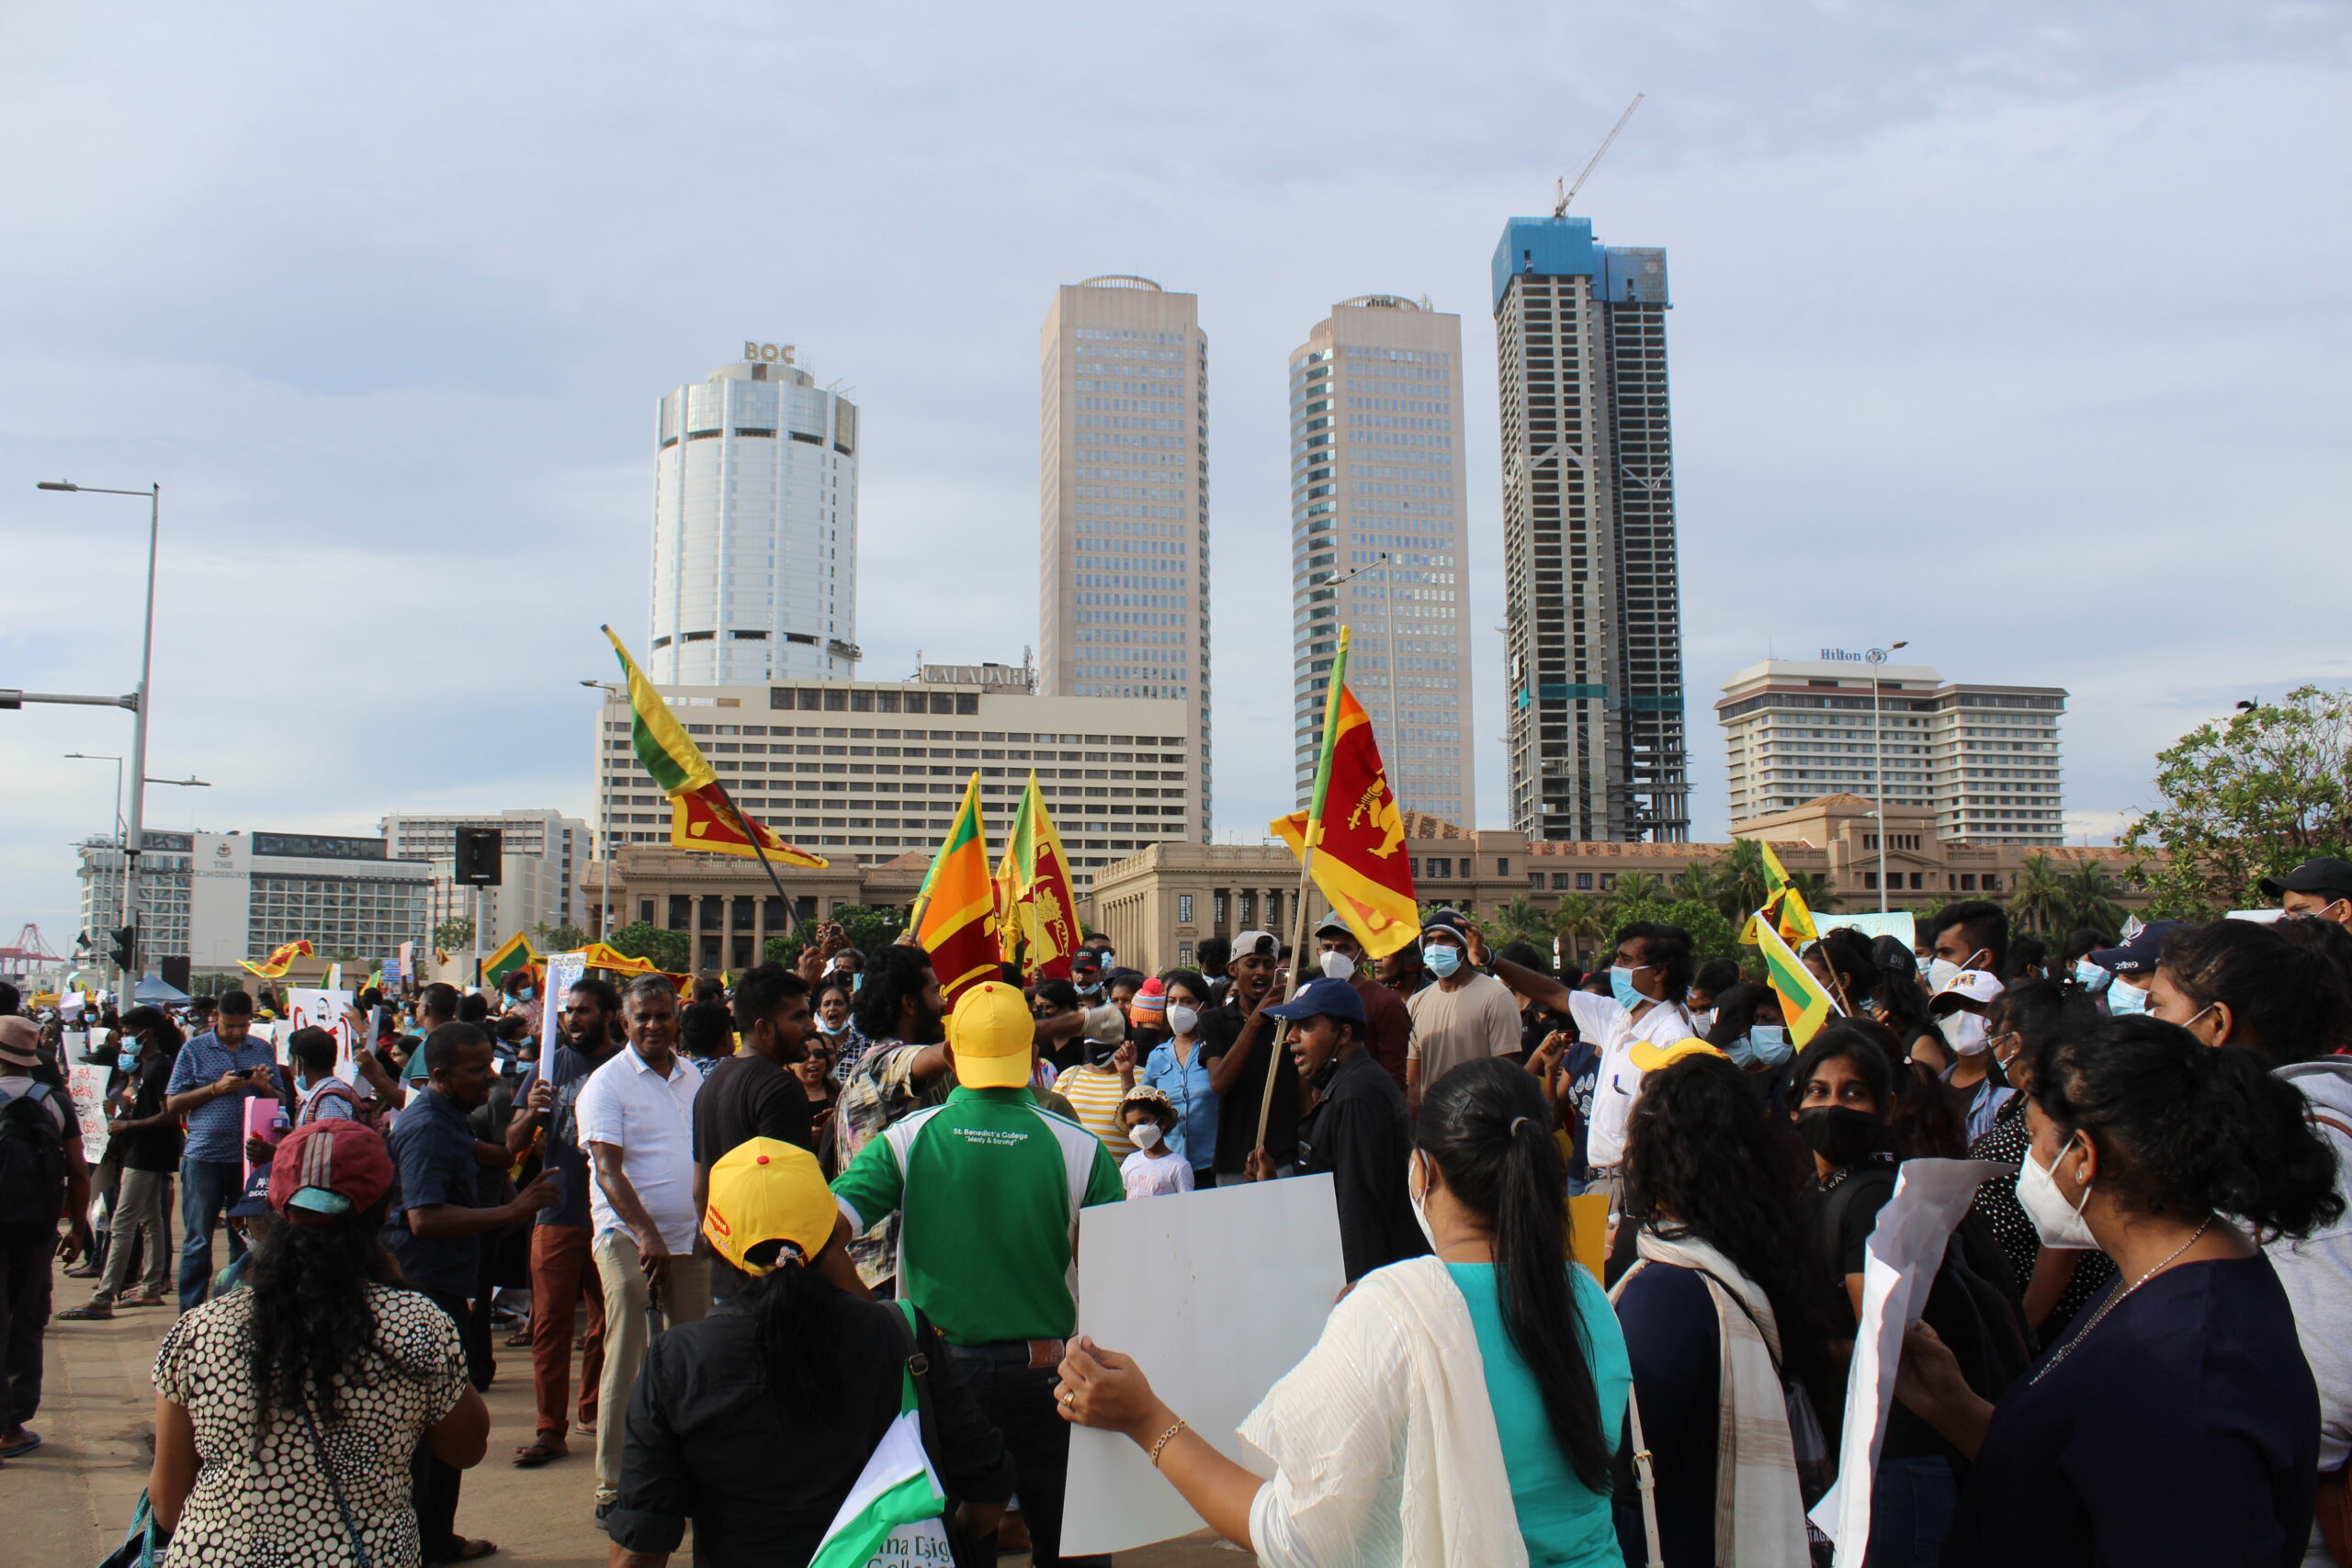 University Students Protest March is happening in Colombo